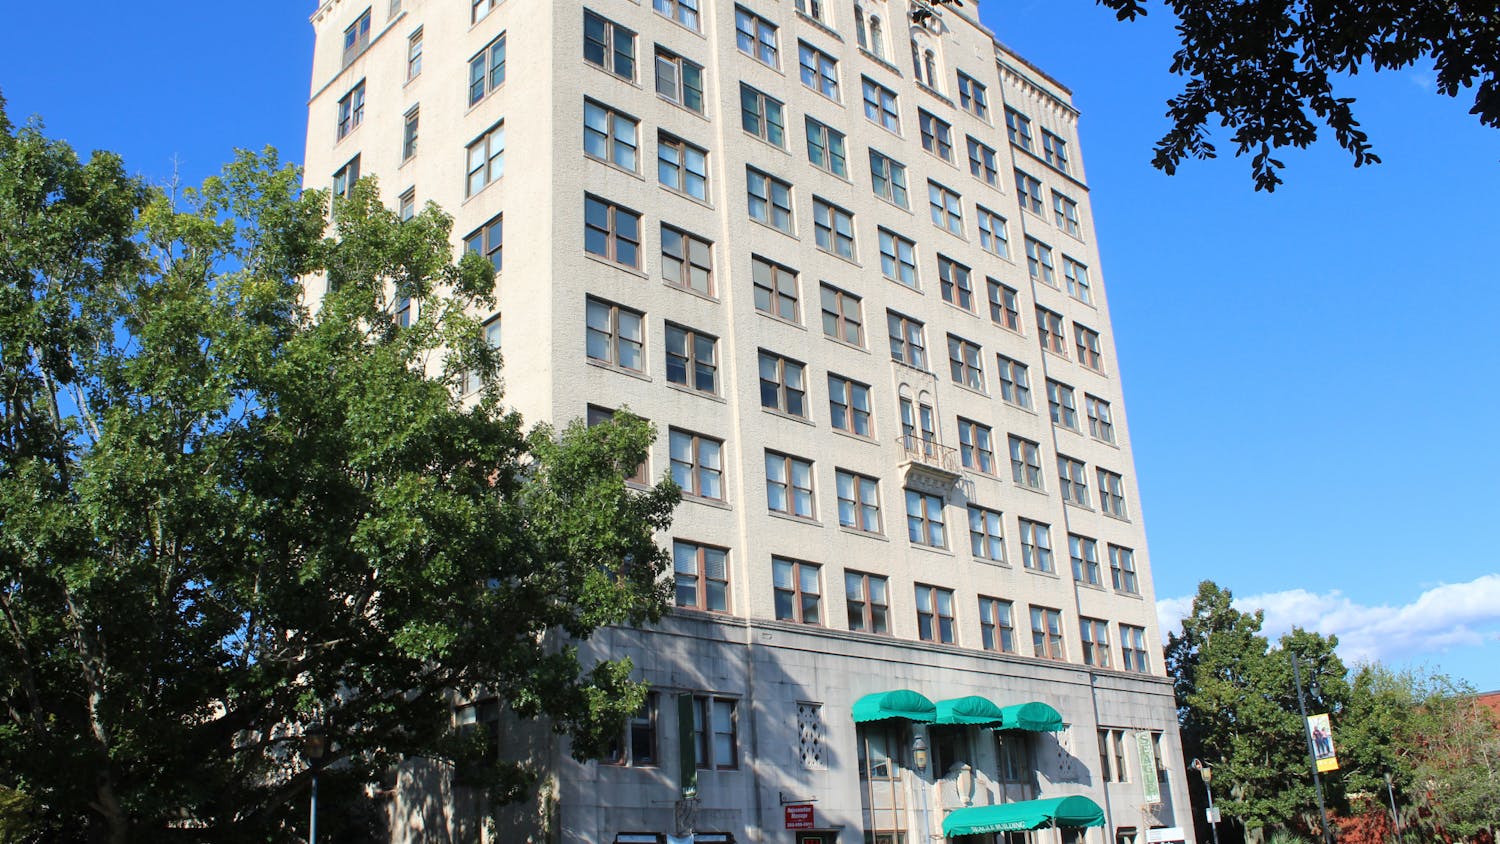 The Seagle Building is seen on Sunday, Sept. 26, 2021.